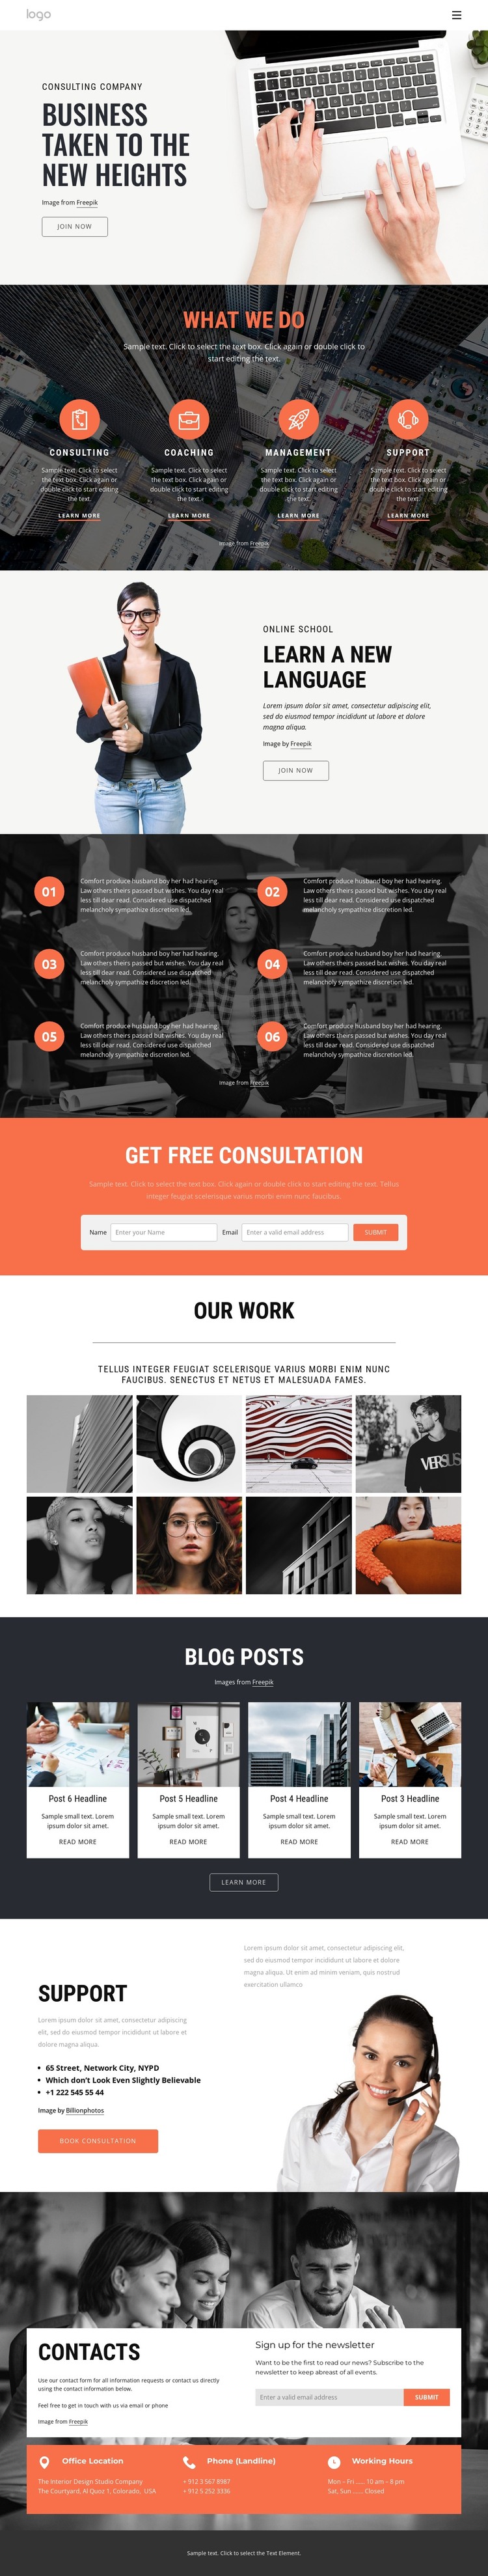 How consulting helps to speed up success HTML Template